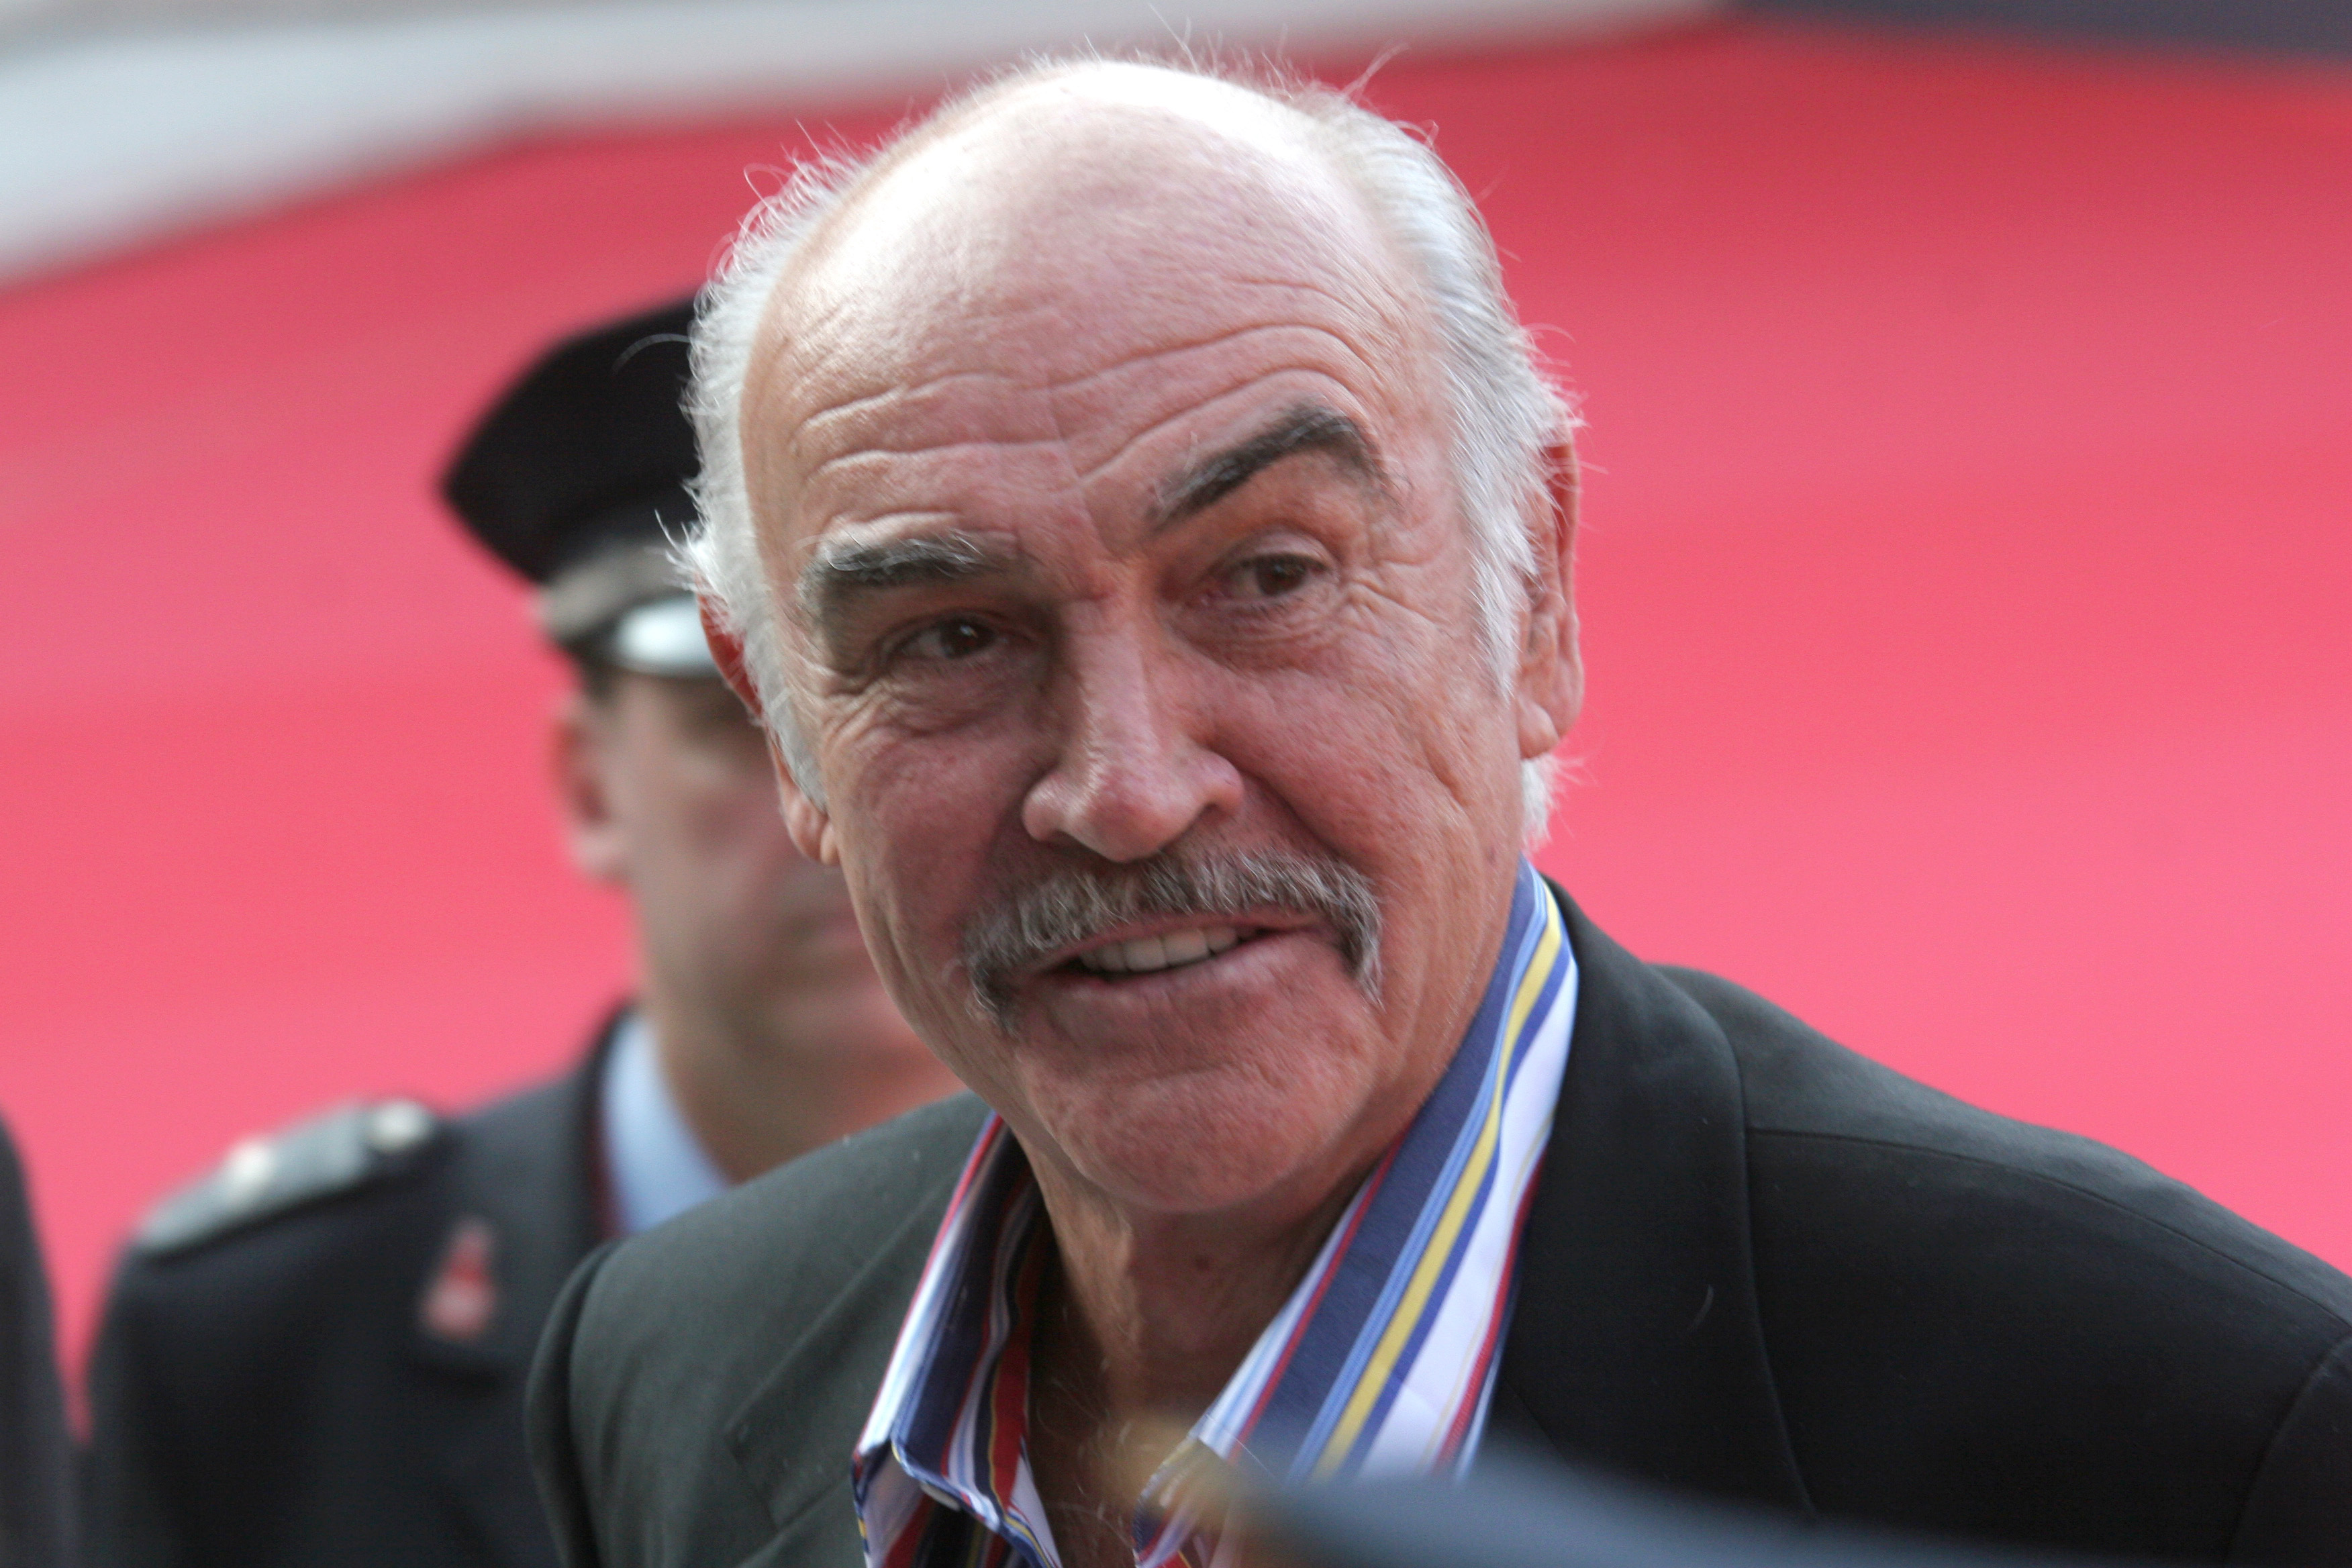 Sean Connery in Italien am 13. Oktober 2006 | Quelle: Getty Images